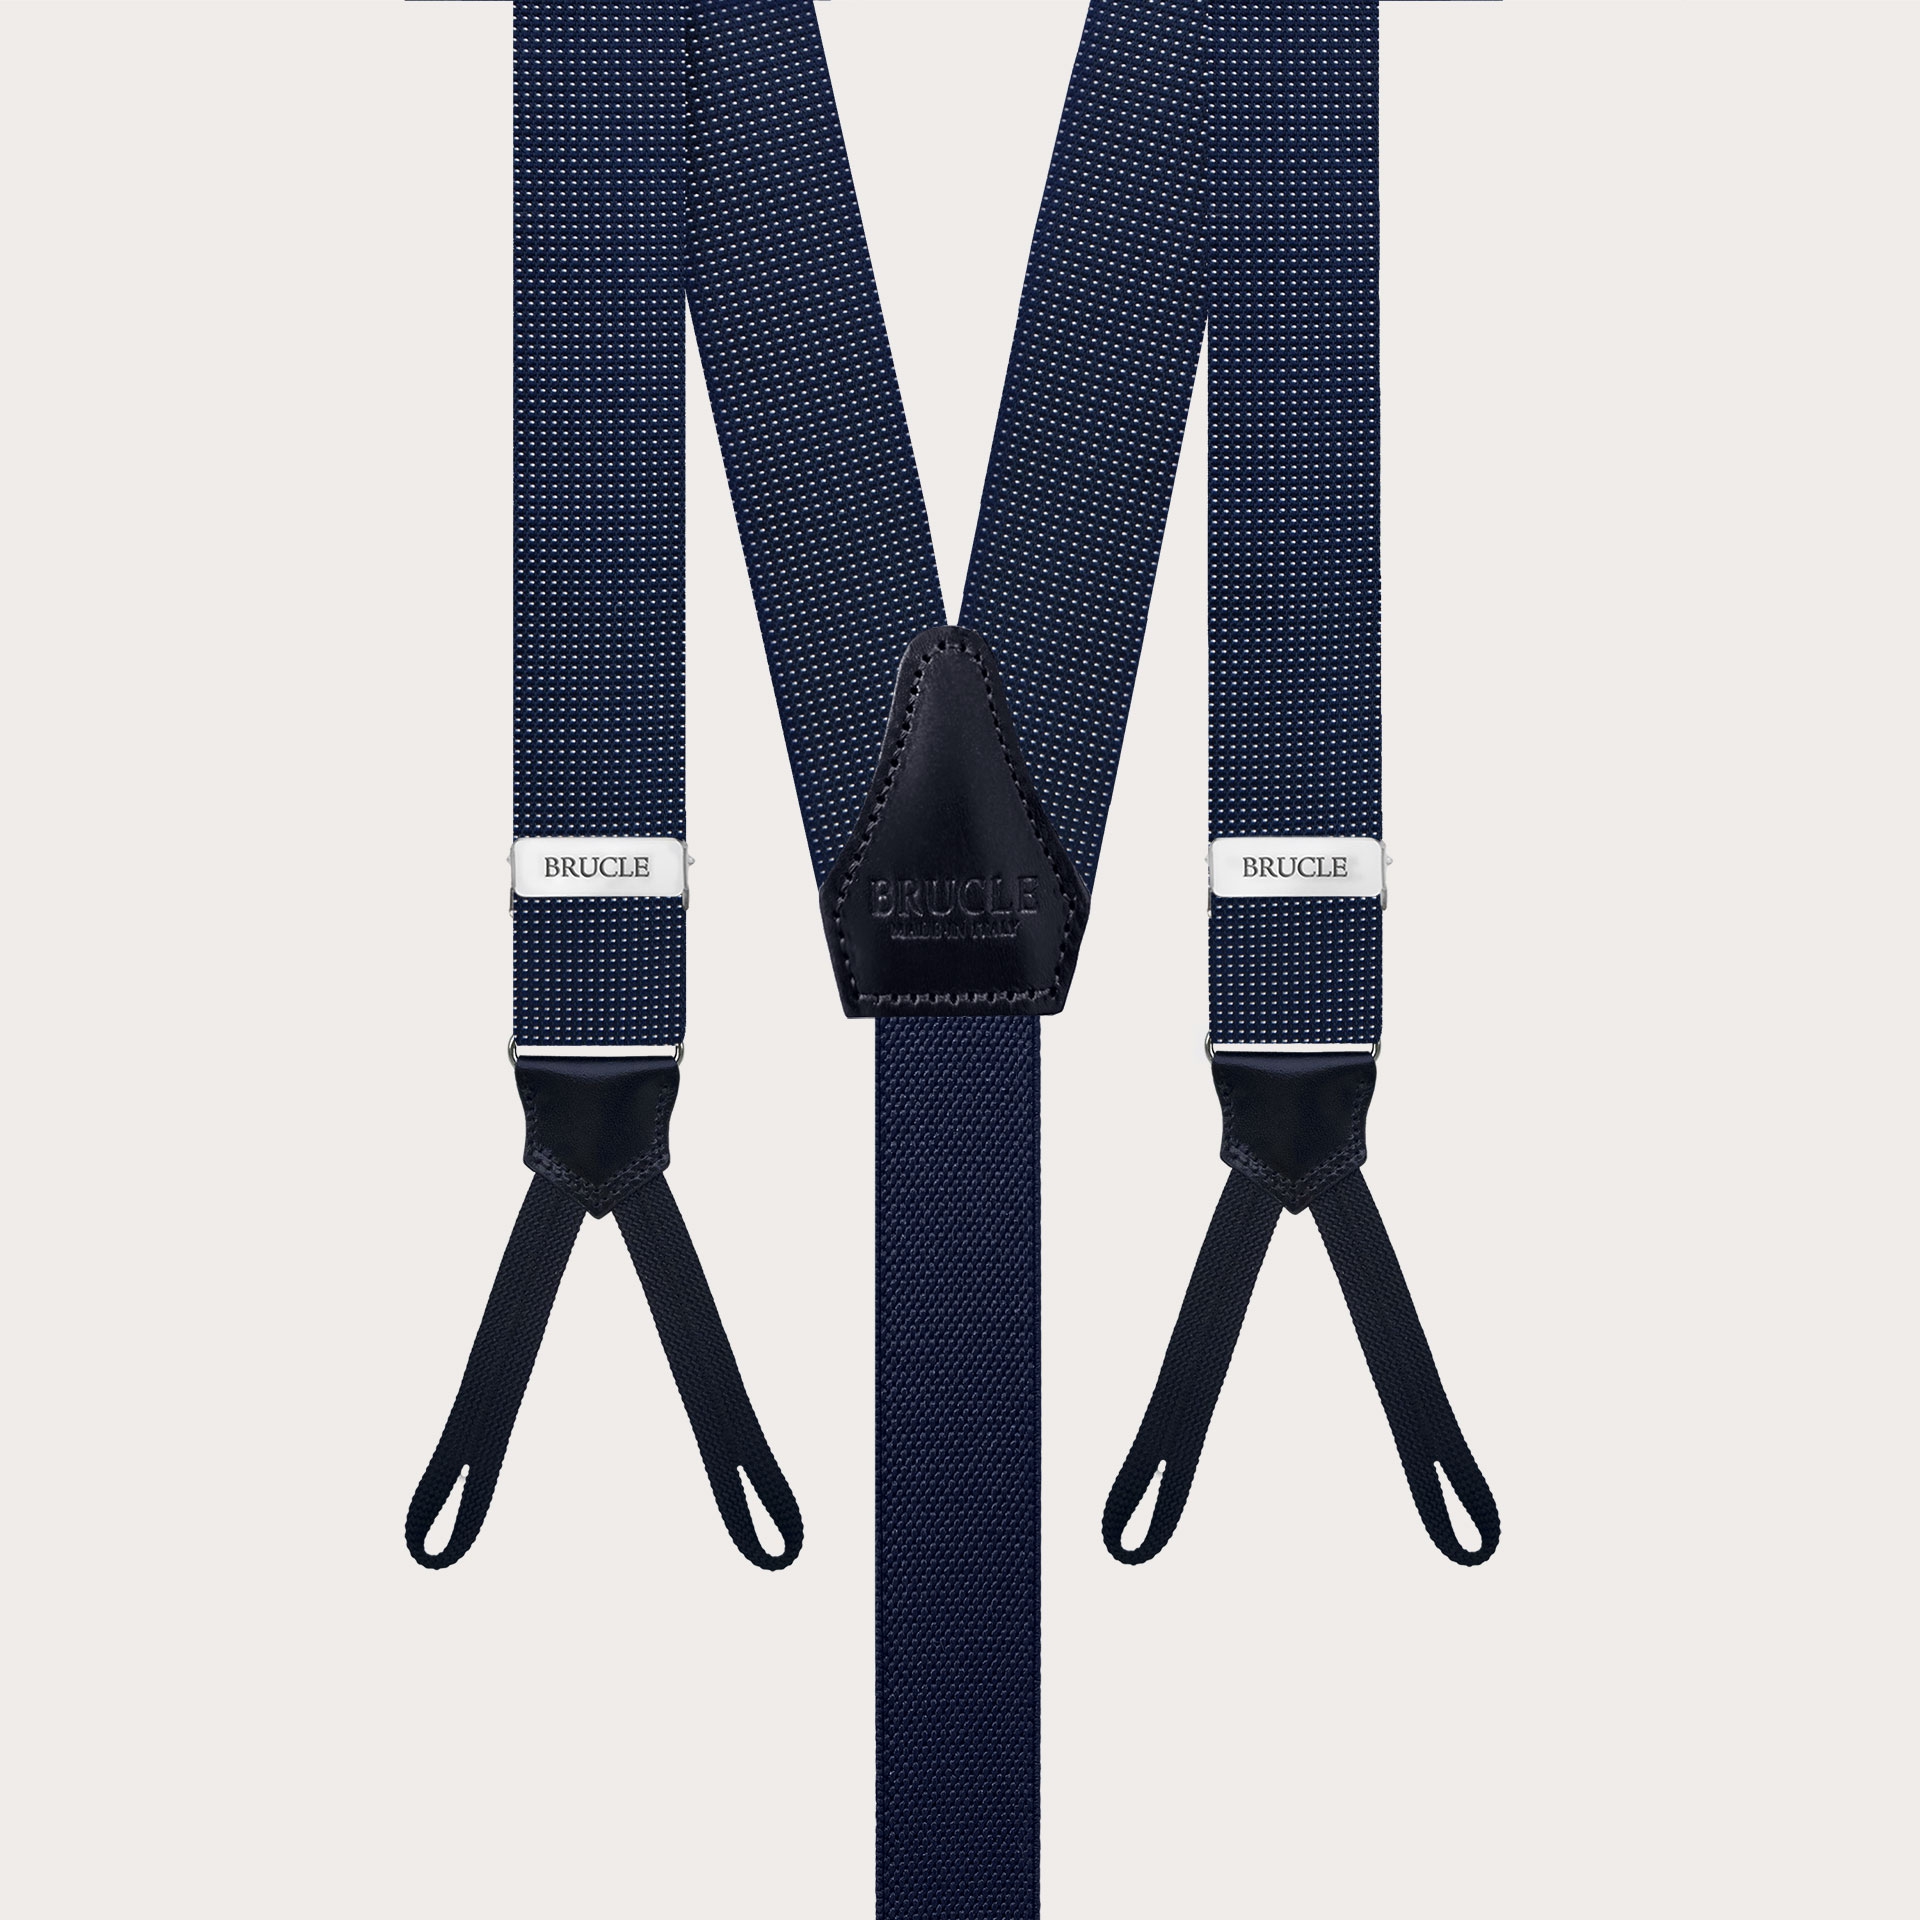 Exclusive men's blue suspenders in silk for buttons with micro-dot pattern